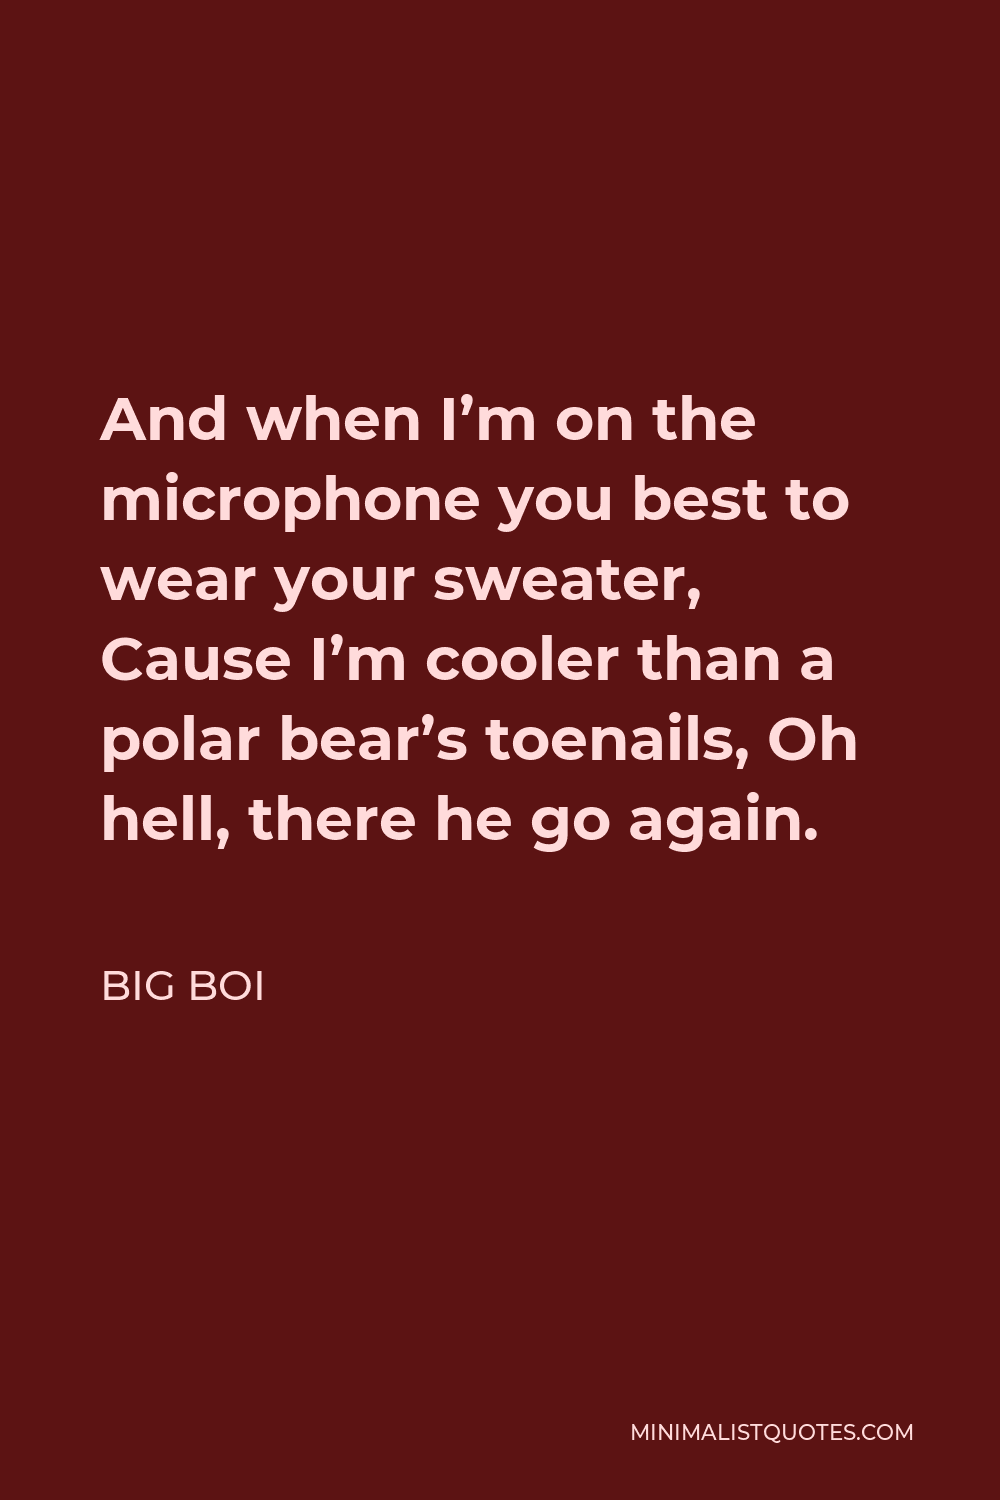 Big Boi Quote - And when I’m on the microphone you best to wear your sweater, Cause I’m cooler than a polar bear’s toenails, Oh hell, there he go again.